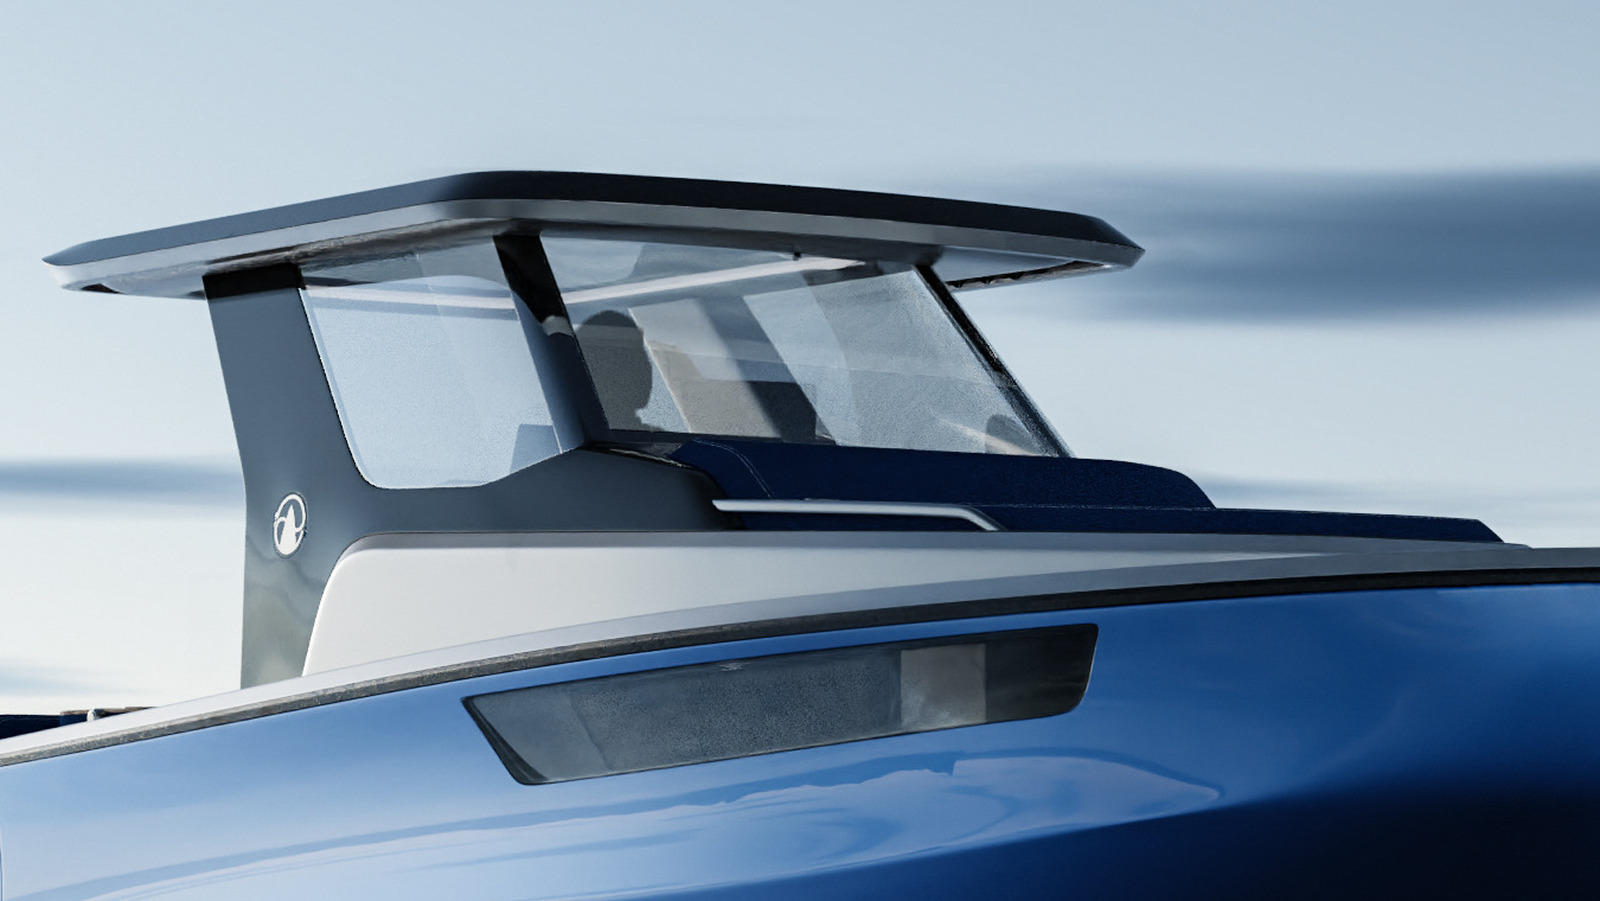 The BIG R30 Electric Boat: Florida's Answer to Luxury and Eco